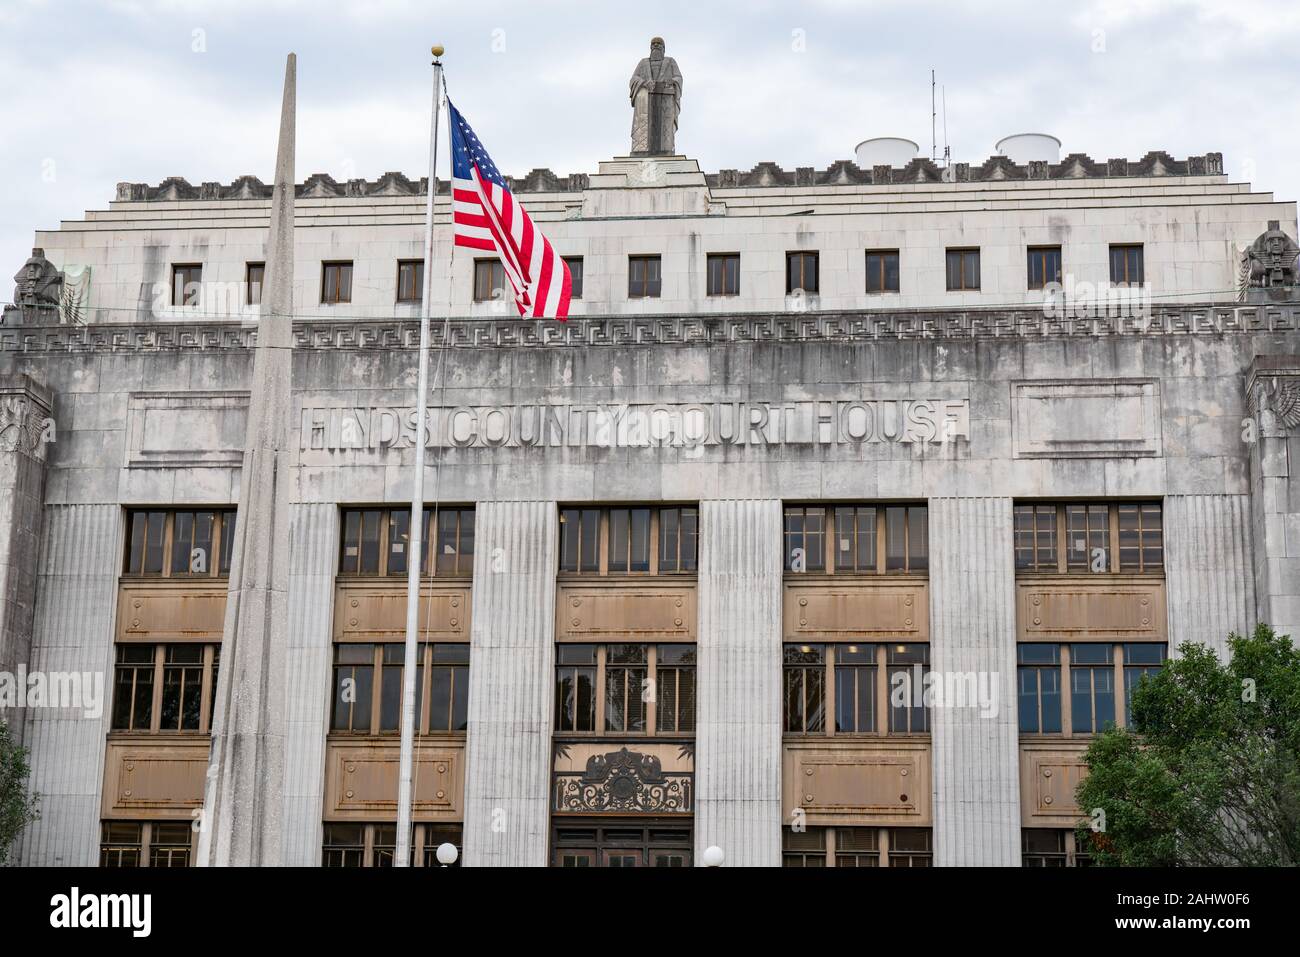 Jackson, MS - October 7, 2019: Exterior of the Hinds County Courthouse in Jackson, Mississippi Stock Photo